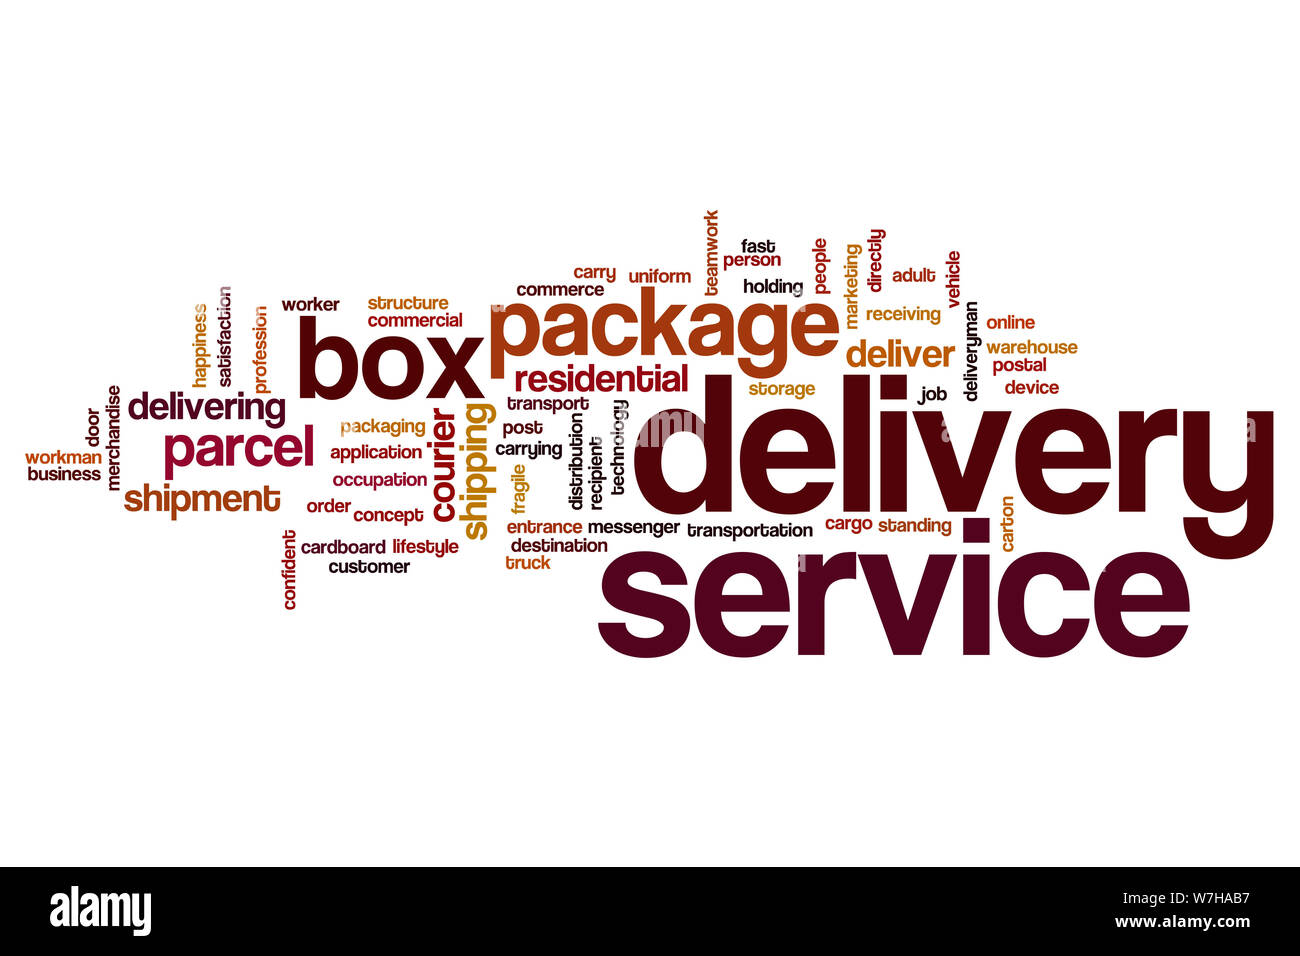 Delivery service word cloud concept Stock Photo